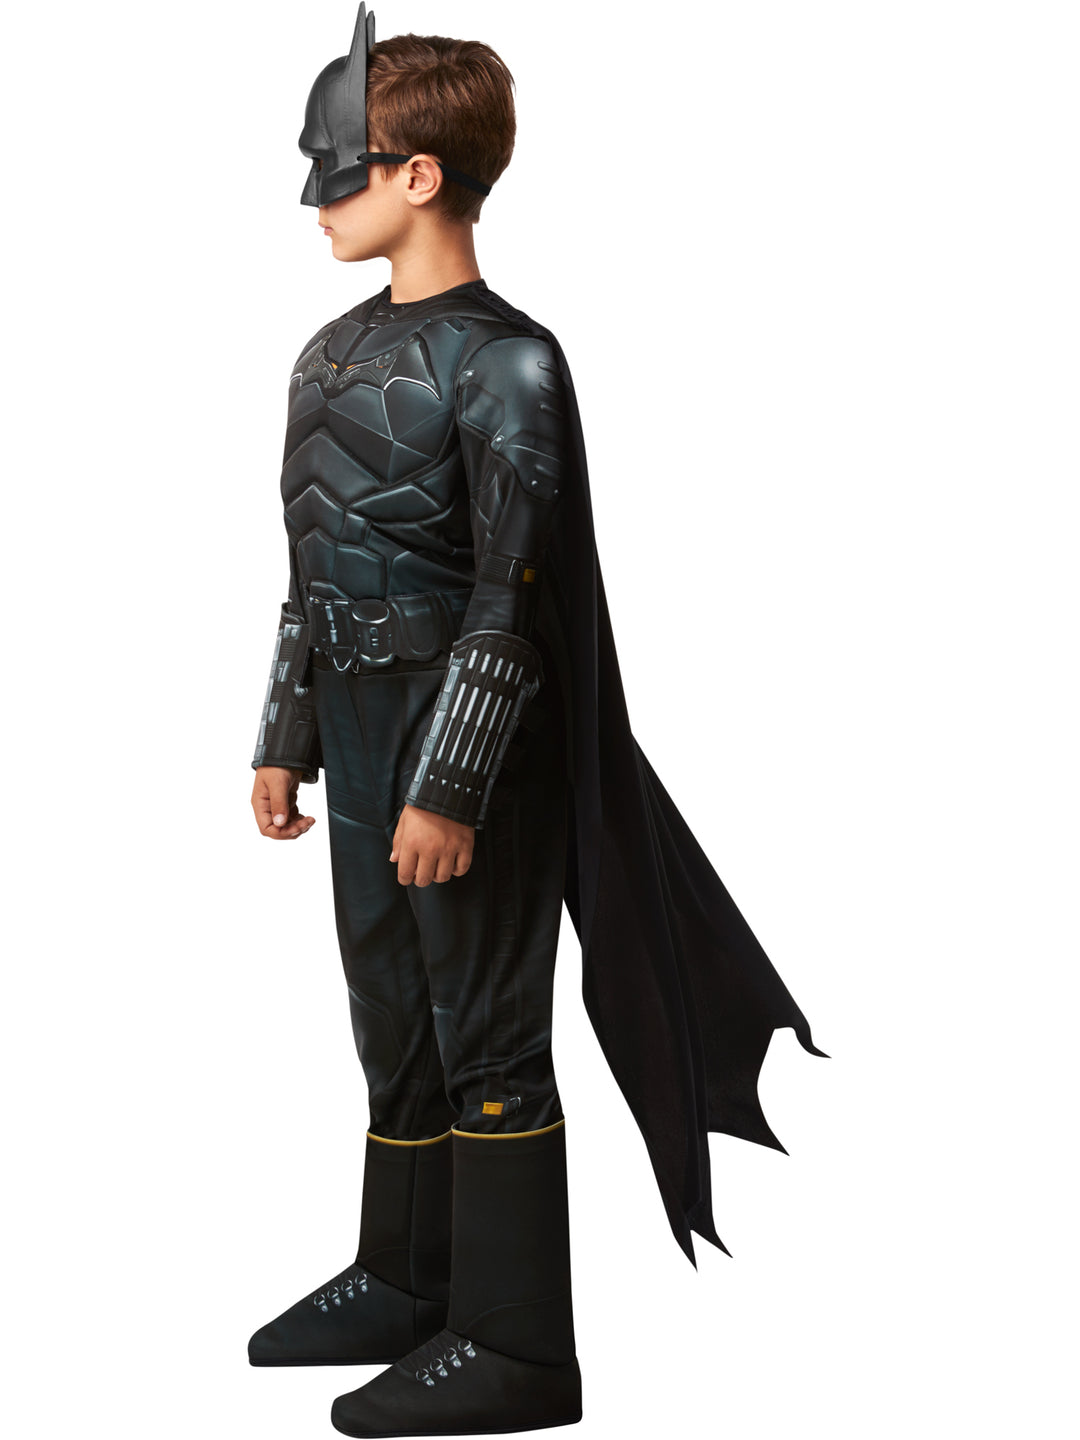 The Batman Boys Muscle Costume Deluxe Printed